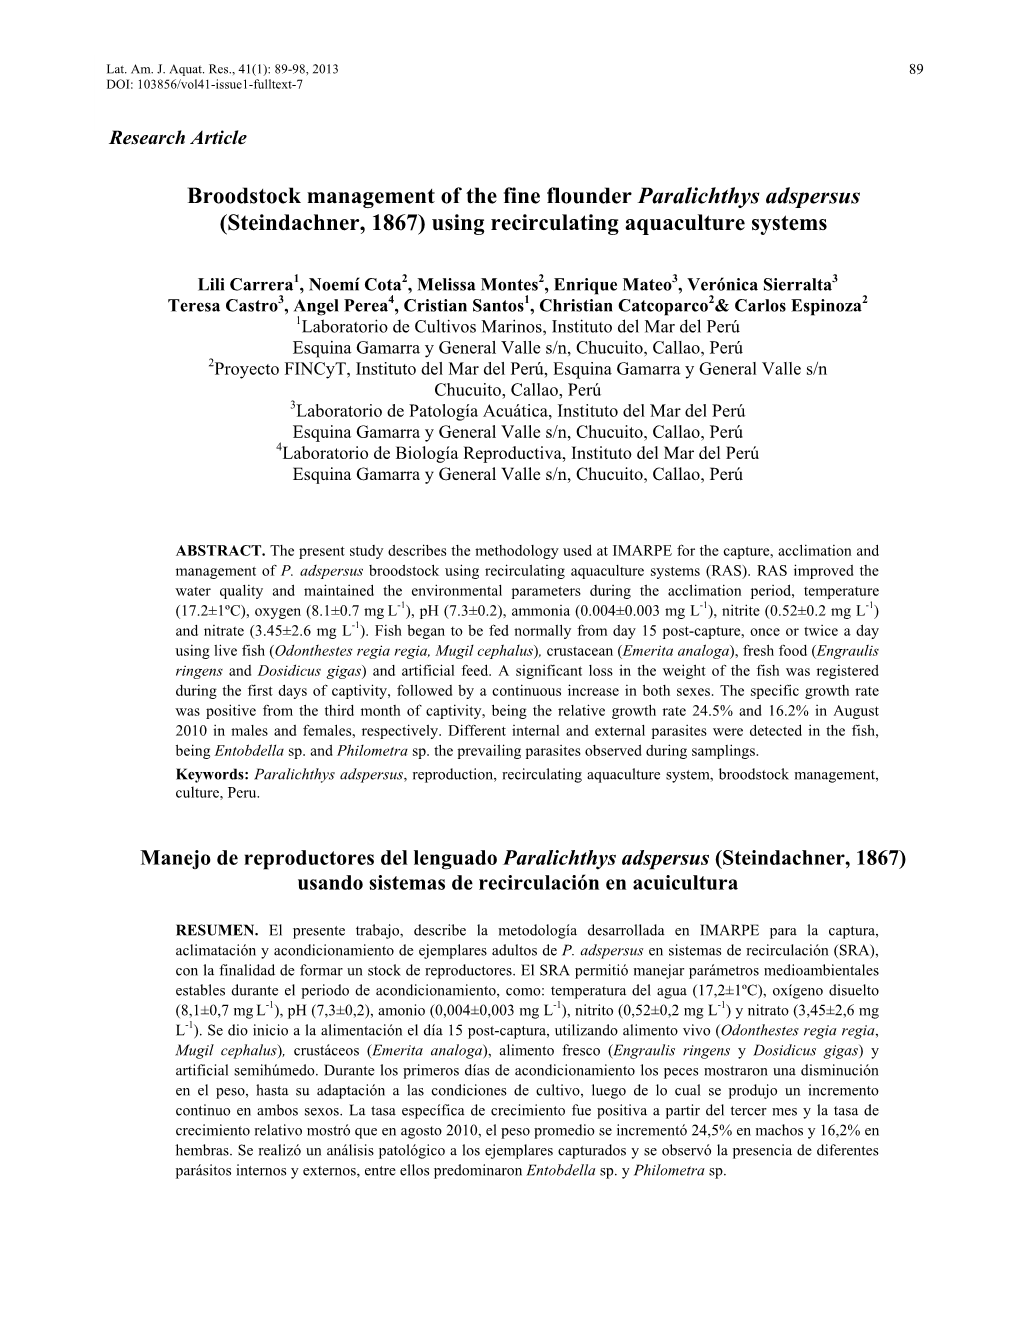 Broodstock Management of the Fine Flounder Paralichthys Adspersus (Steindachner, 1867) Using Recirculating Aquaculture Systems